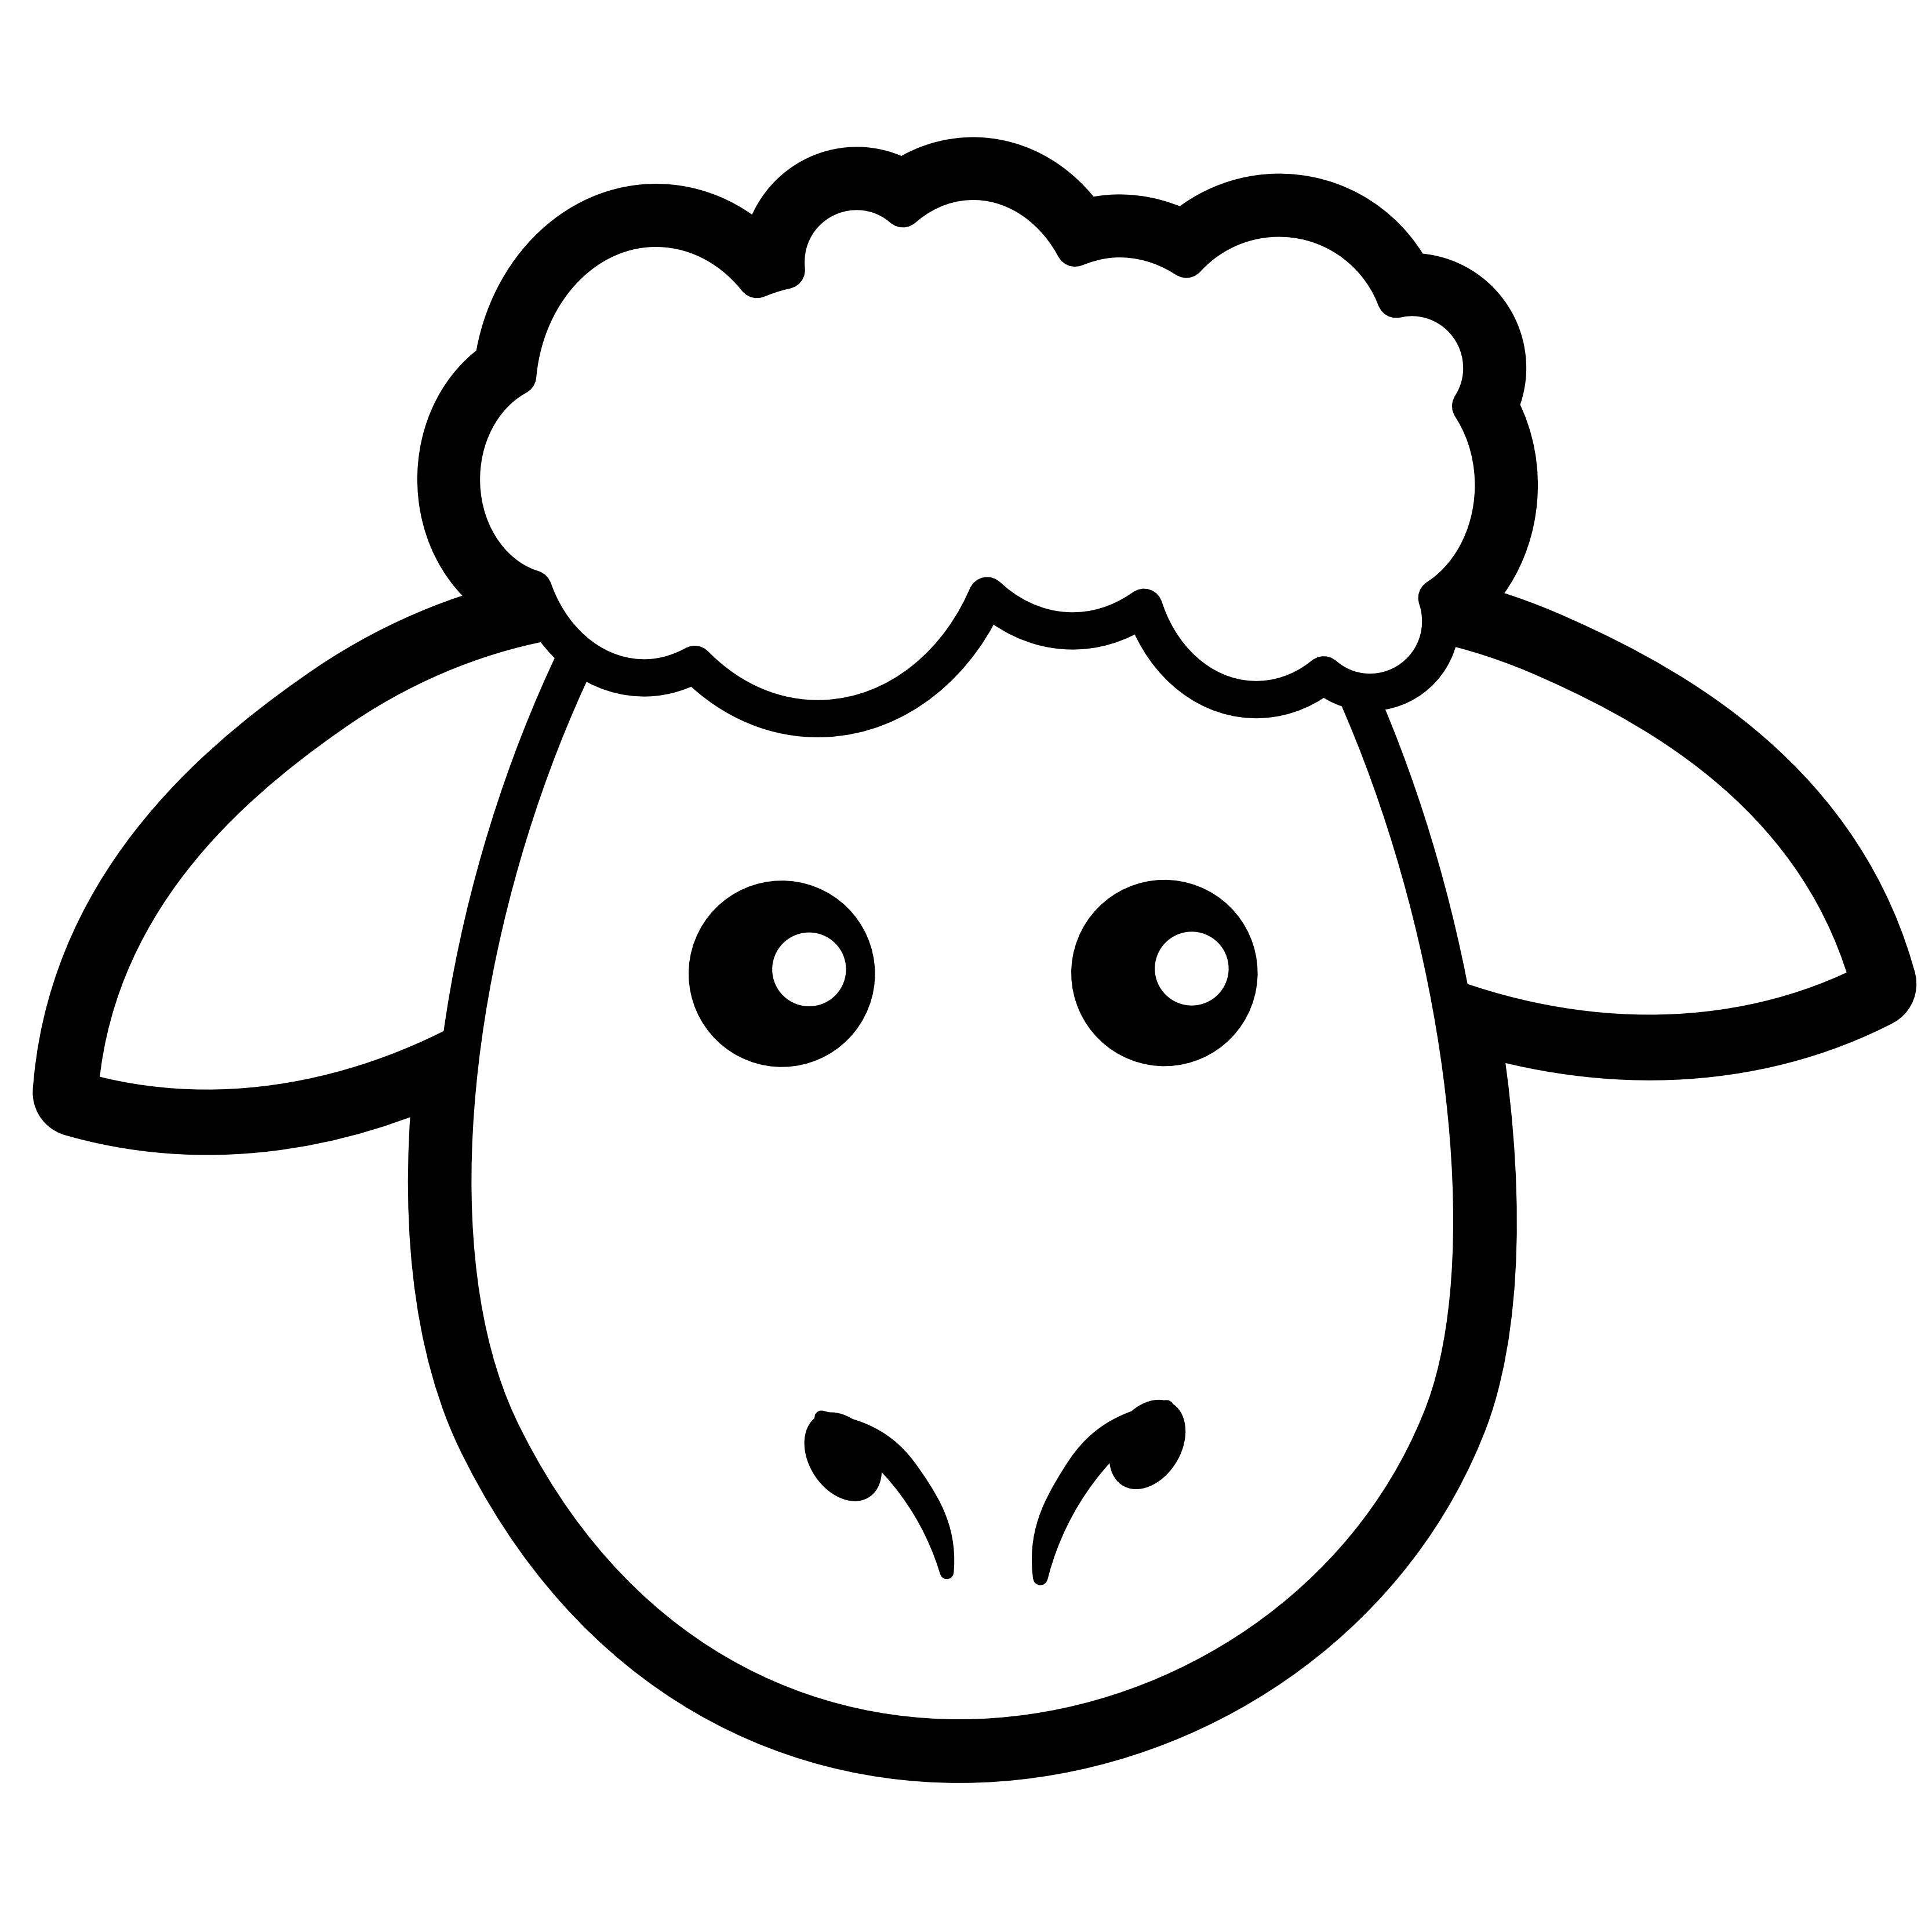 Cow head free download. White clipart lamb